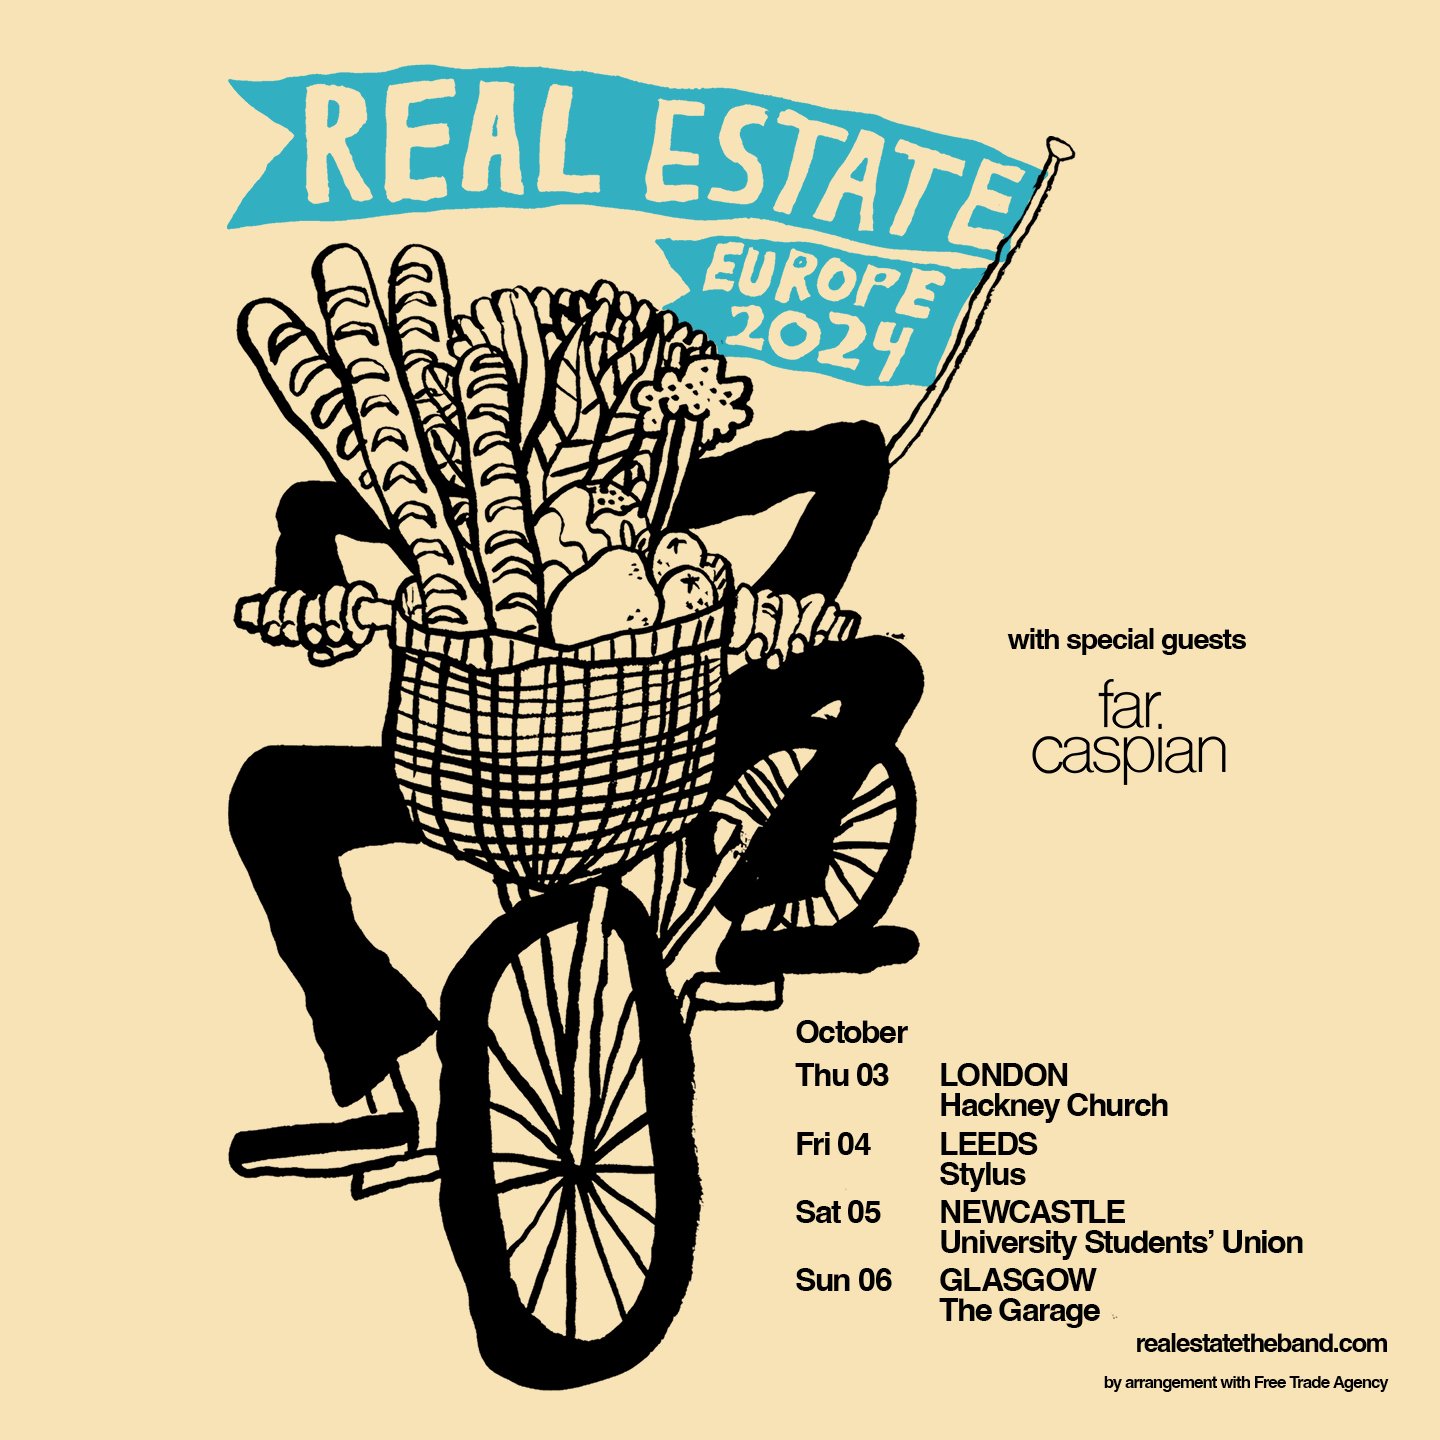 Wowsers @farcaspian joins indie legends @realestateband on their October UK tour! 

Not to be missed, tickets on sale now!